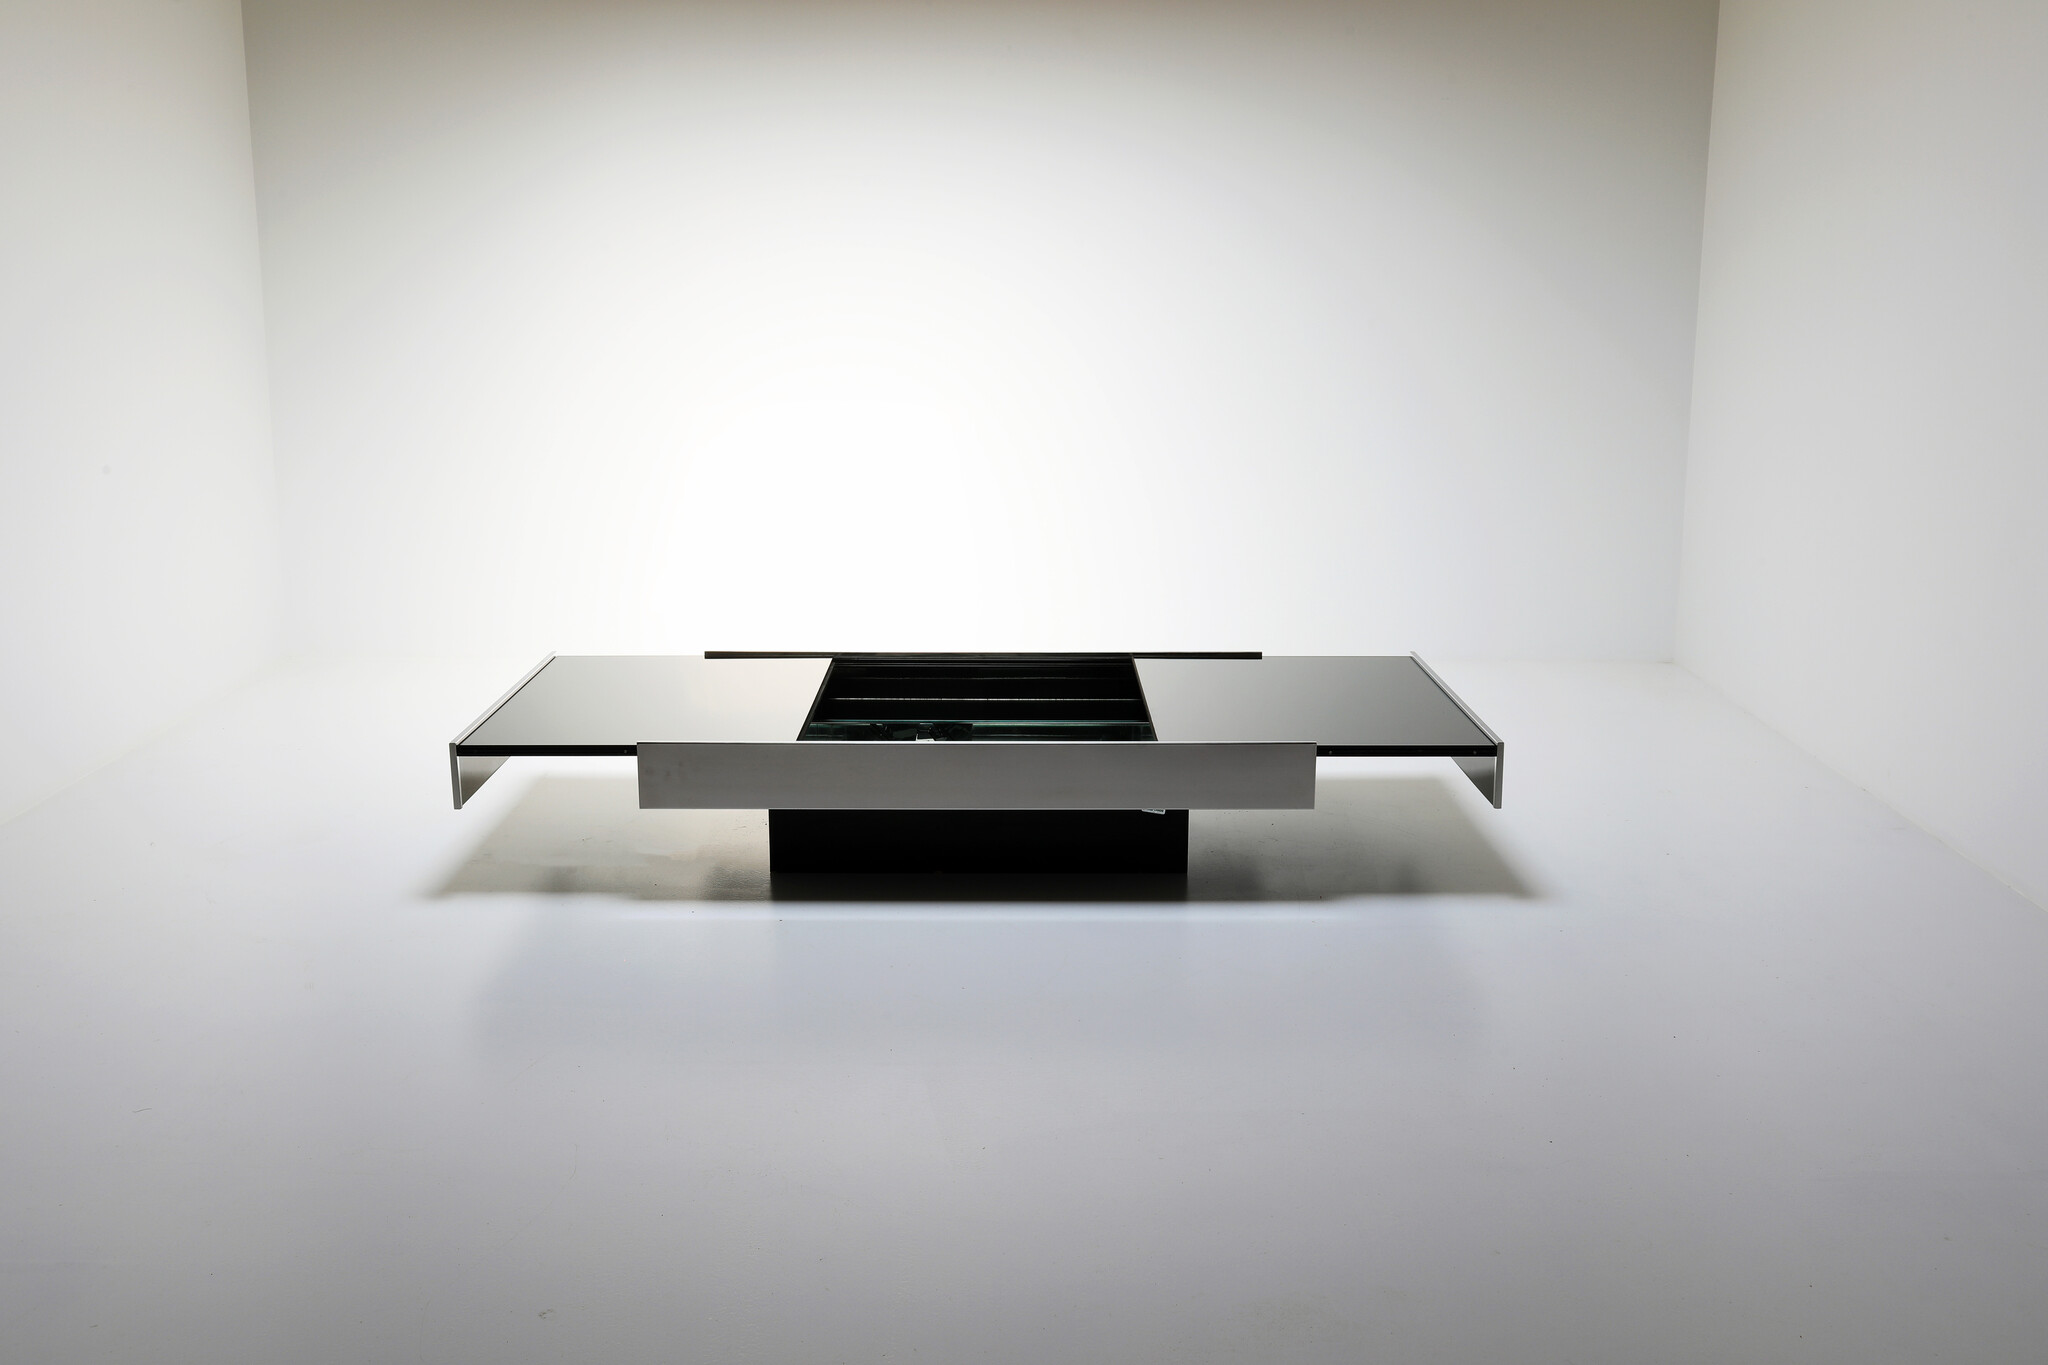 Coffee table with hidden bar by Willy Rizzo for Cidue, 1970.